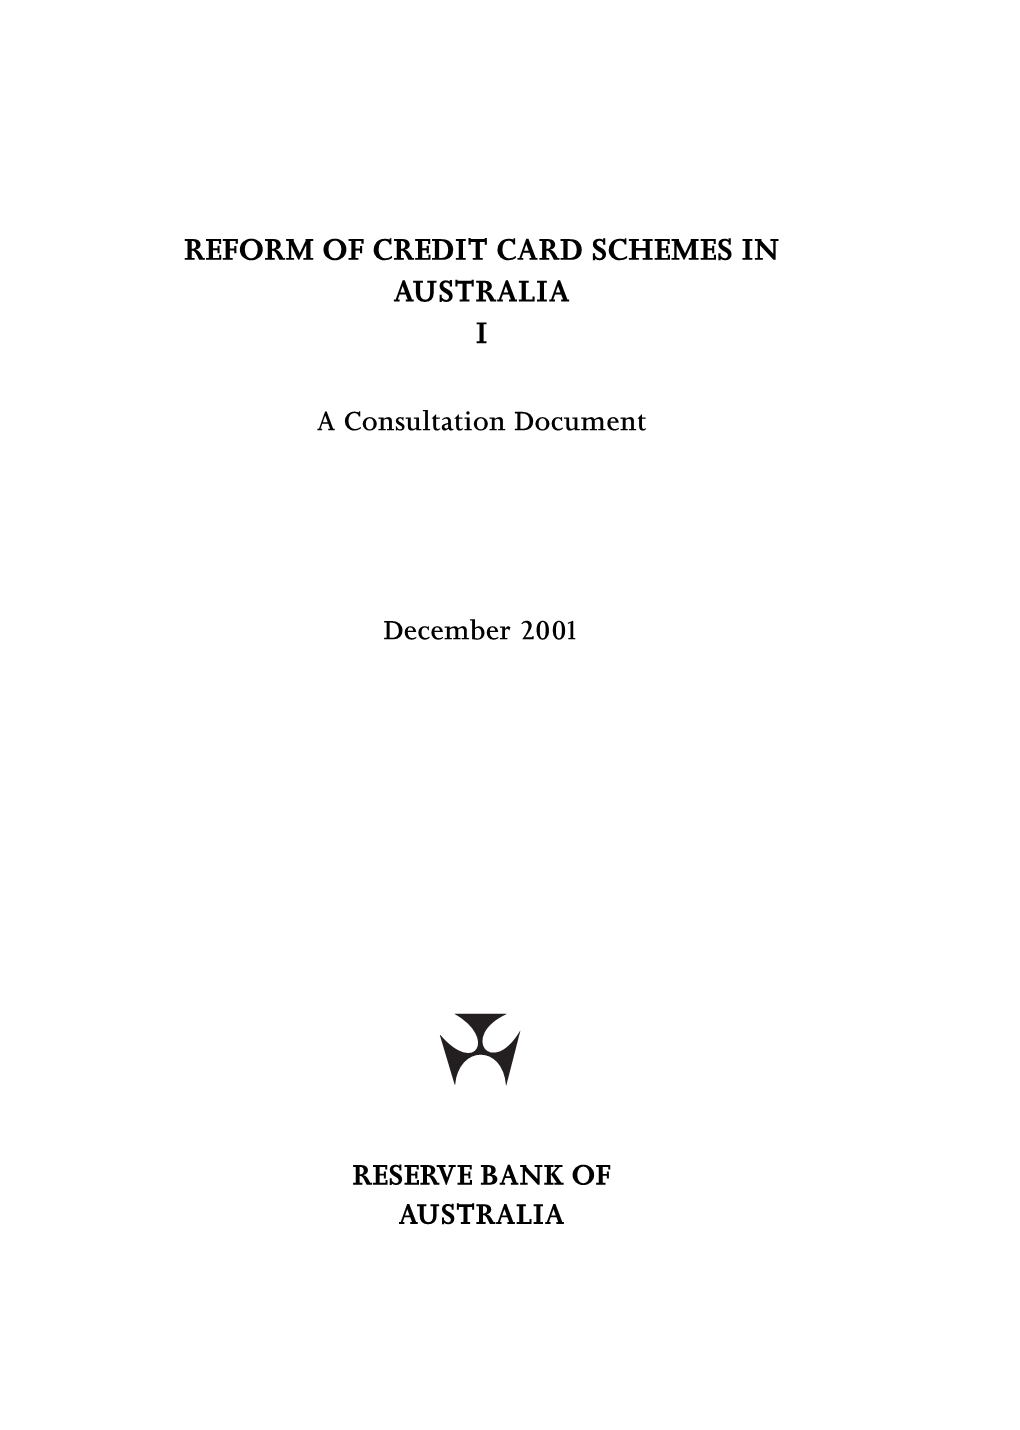 Reform of Credit Card Schemes in Australia: I a Consultation Document